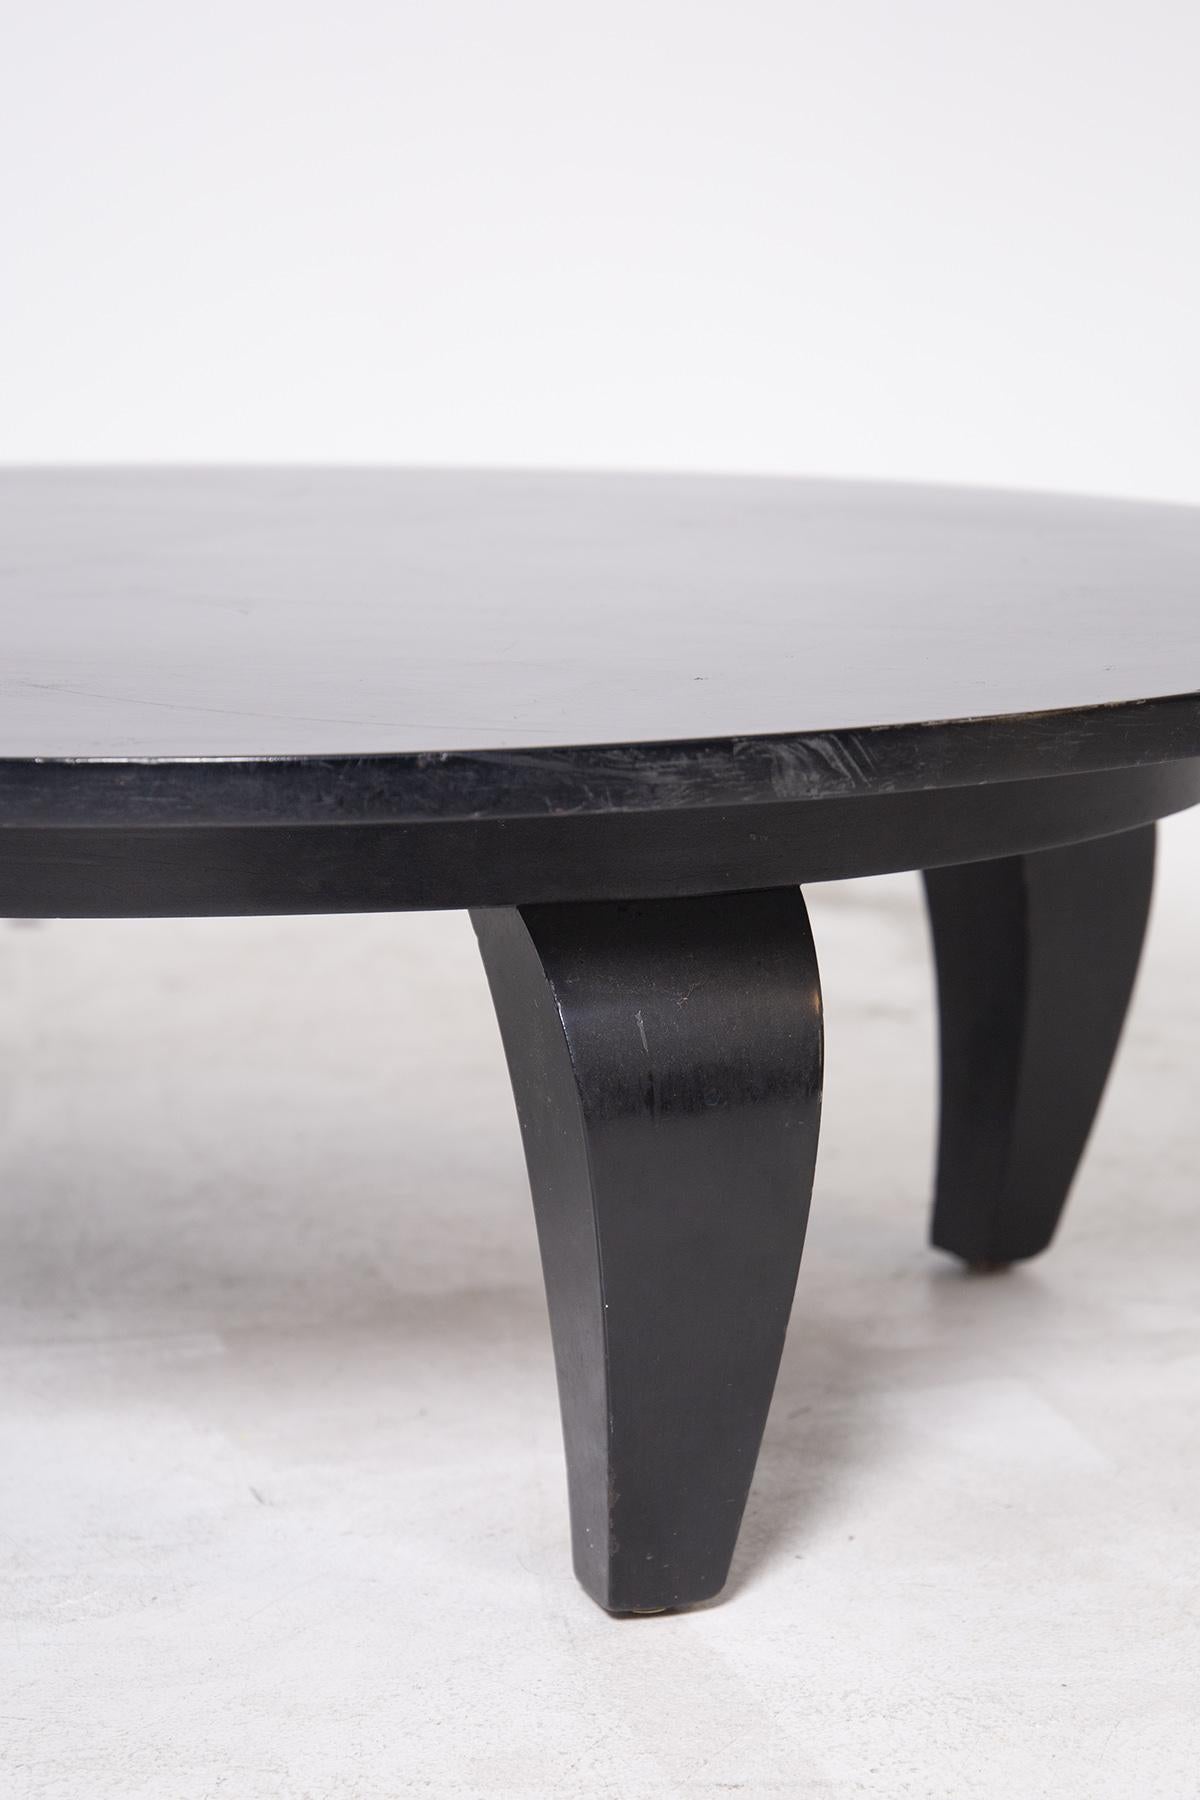 American Classical American Coffee Table in Black Wood, 1950s For Sale